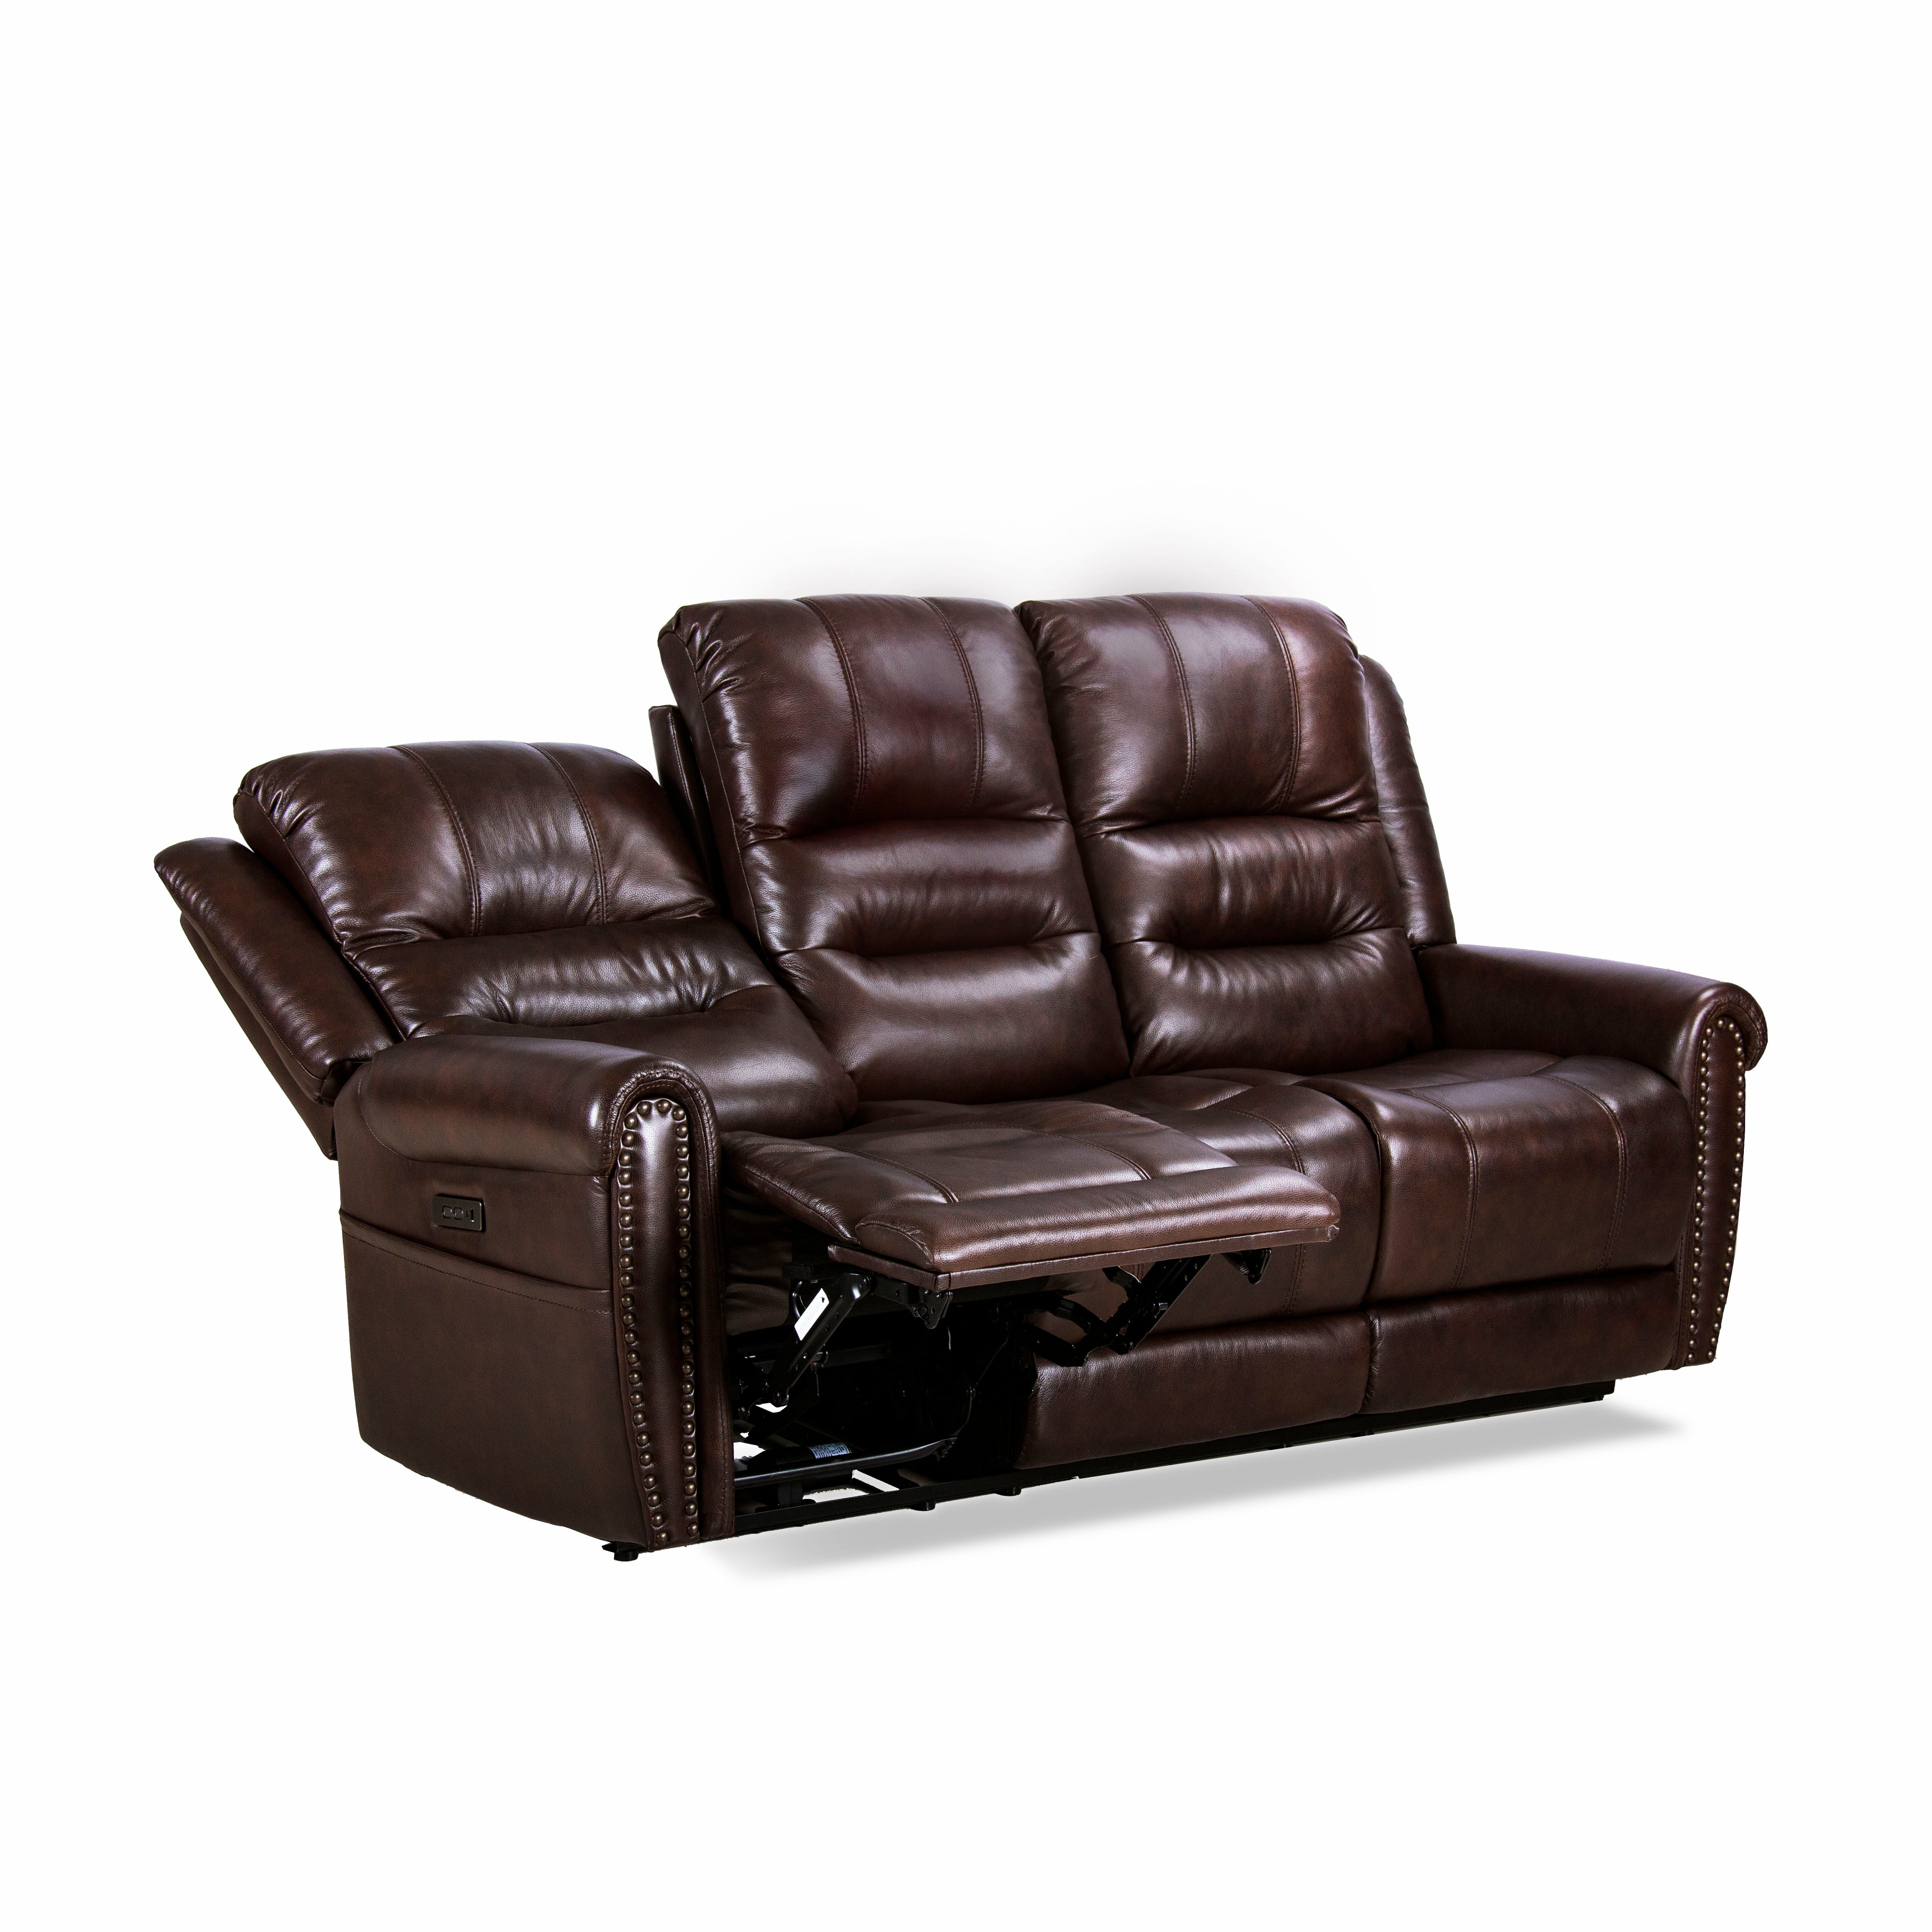 Espoo Genuine Top Grain Leather Nailhead Dropdown Table And Adjustable Headrest Power Reclining Sofa In Brown